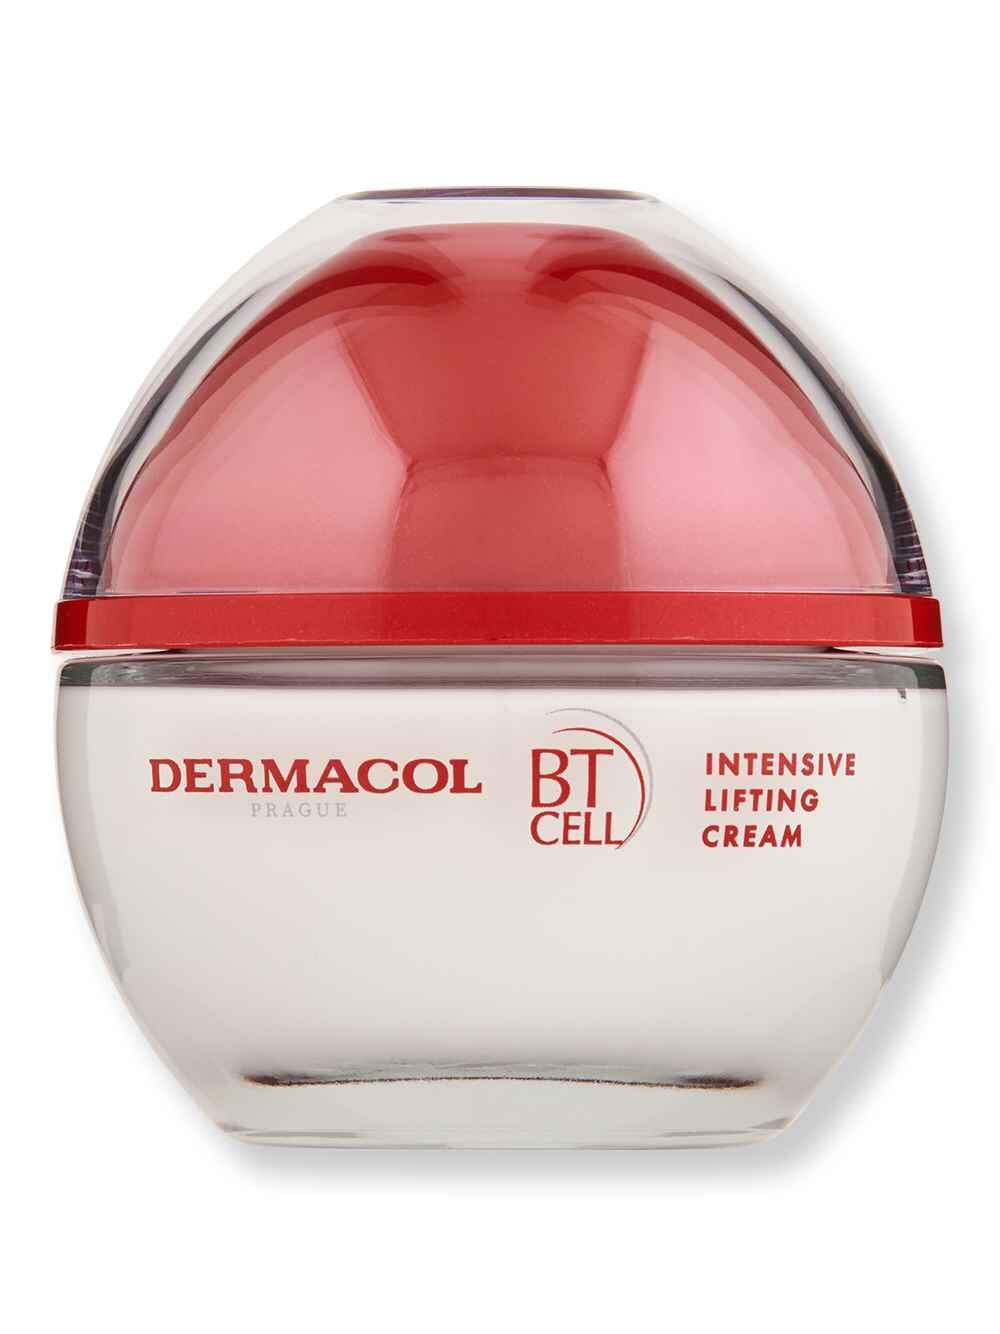 Dermacol Dermacol BT Cell Intensive Lifting Cream 50 ml Skin Care Treatments 